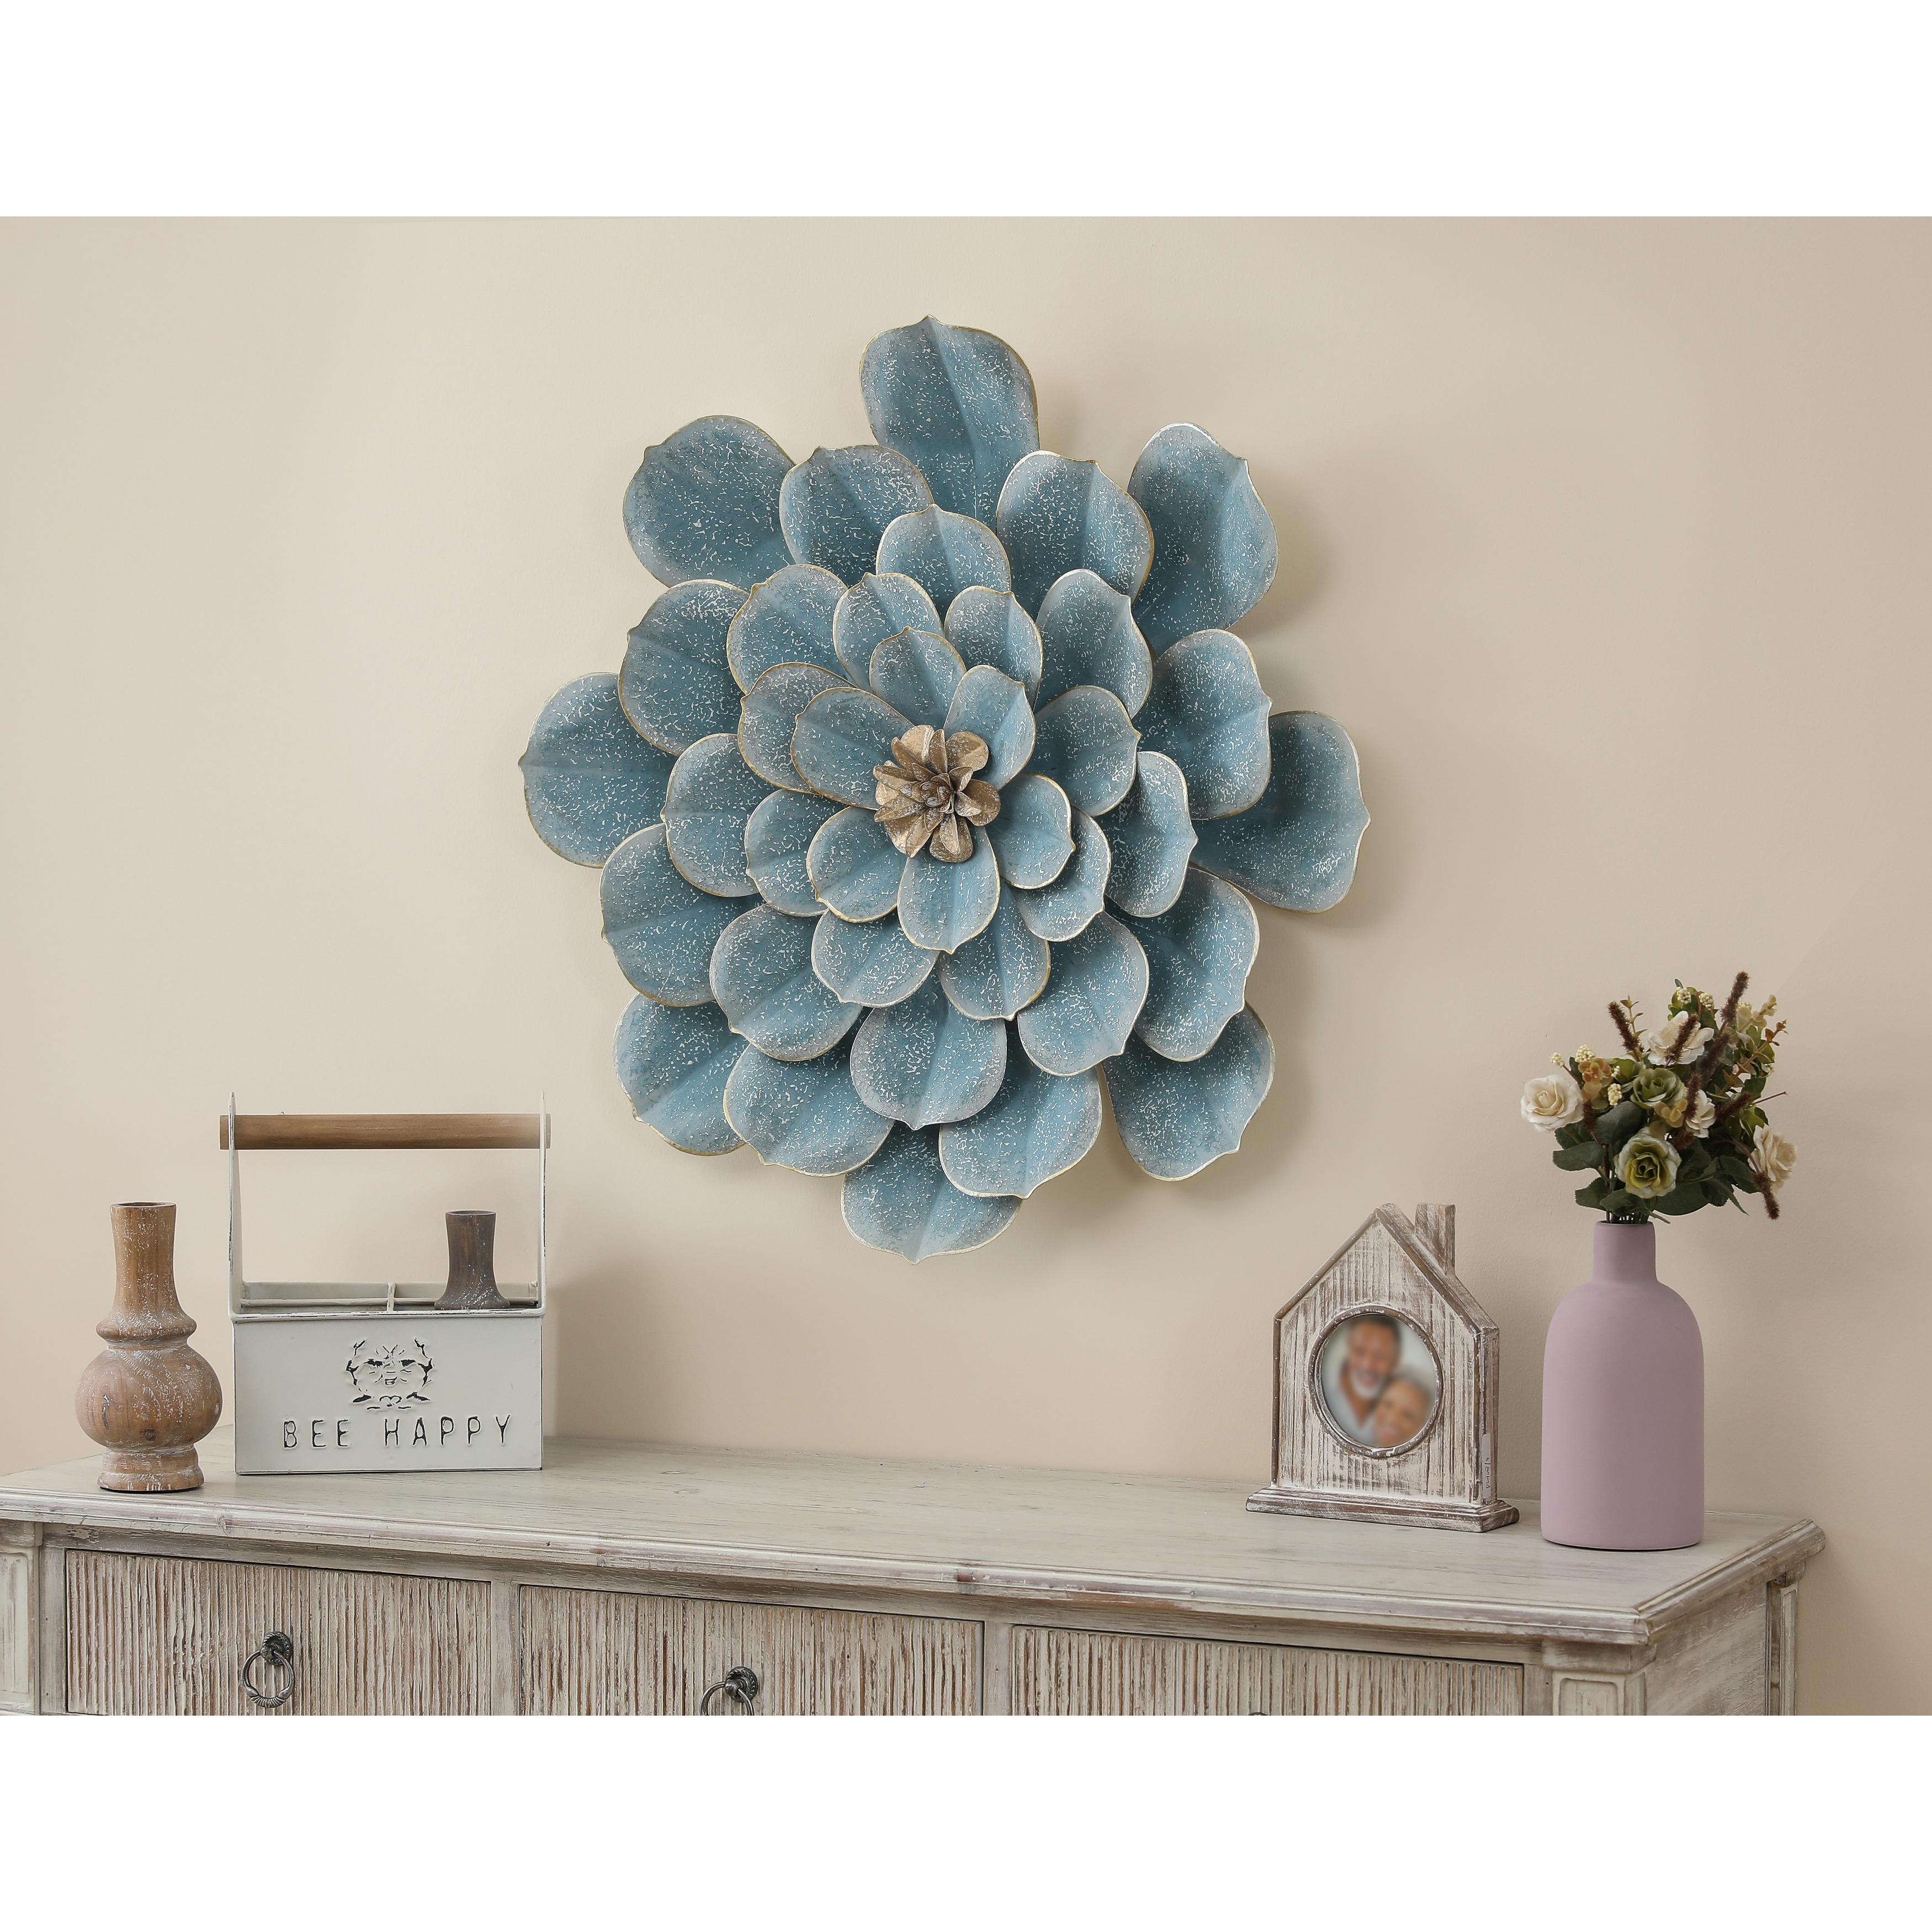 11 Inch Large Metal Flower Wall Art Multiple Layer Home Decor for Outdoor Bedroom Living Room Office Garden